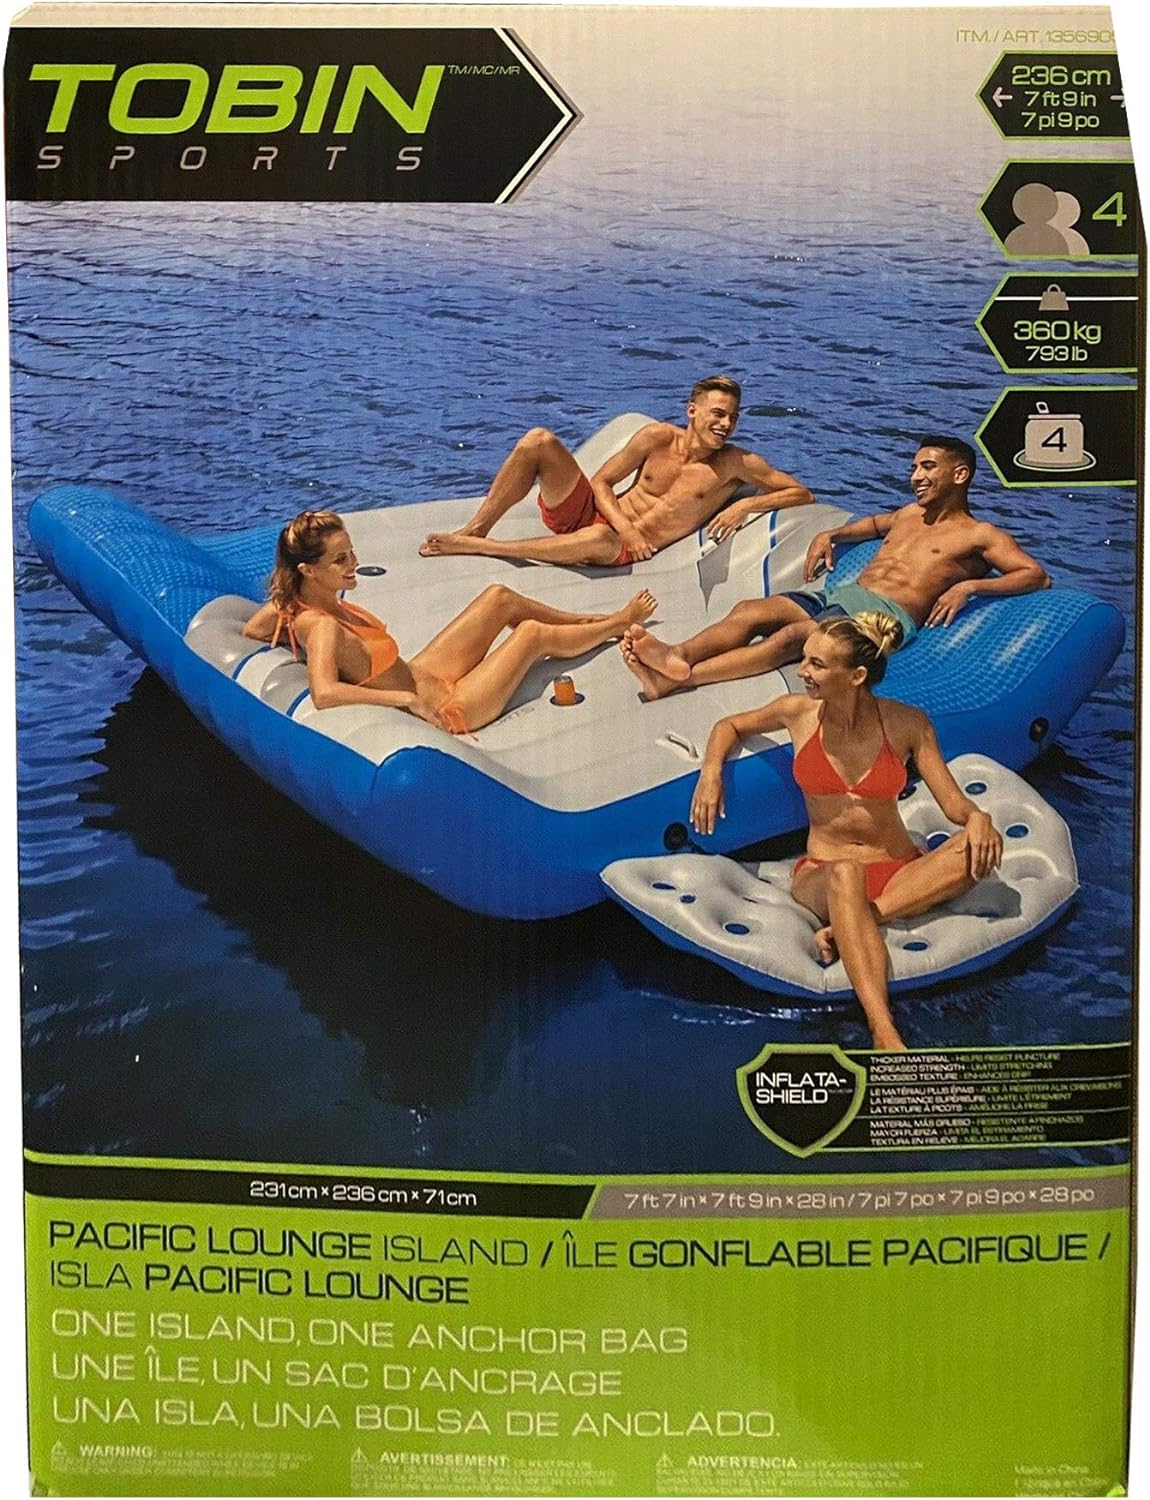 Tobin Sports Pacific Lounge Island Inflatable harbor for 4 people with cup holder